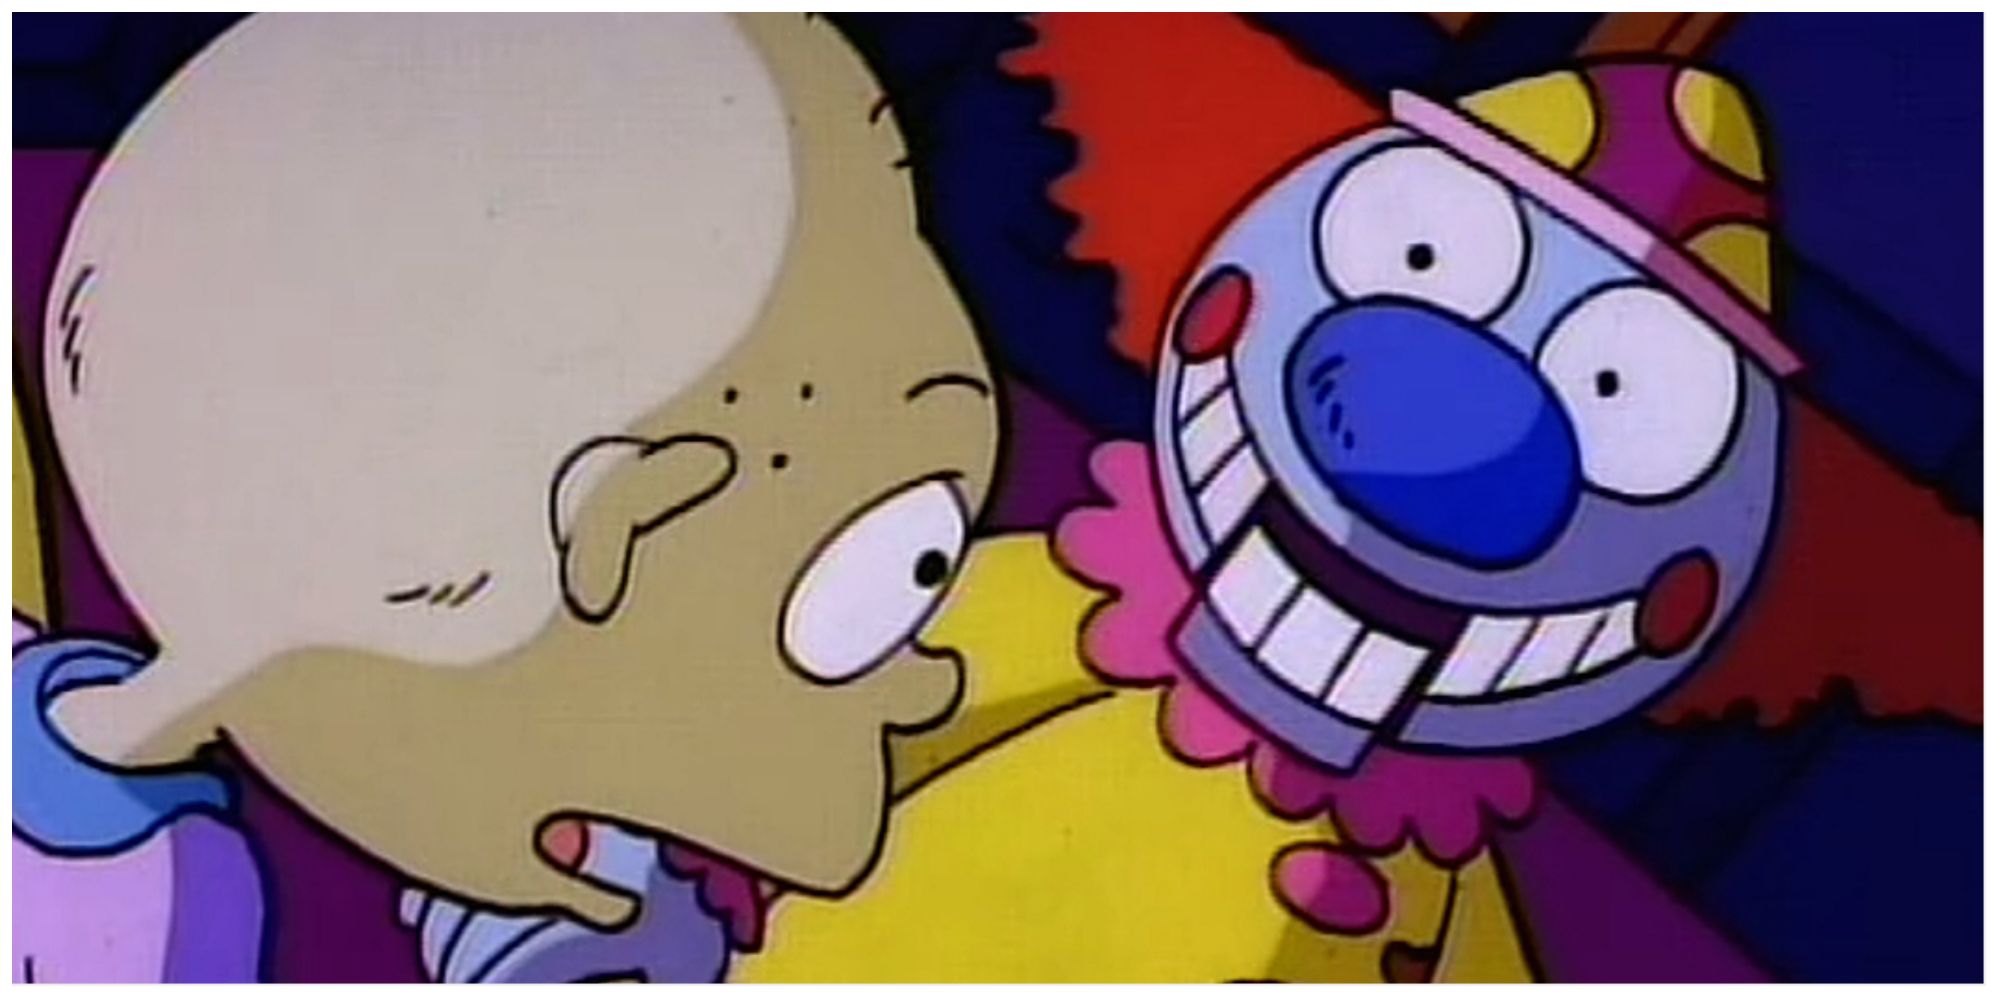 Tommy Pickles and Mr. Friend from the Rugrats episode the mysterious mr. friend